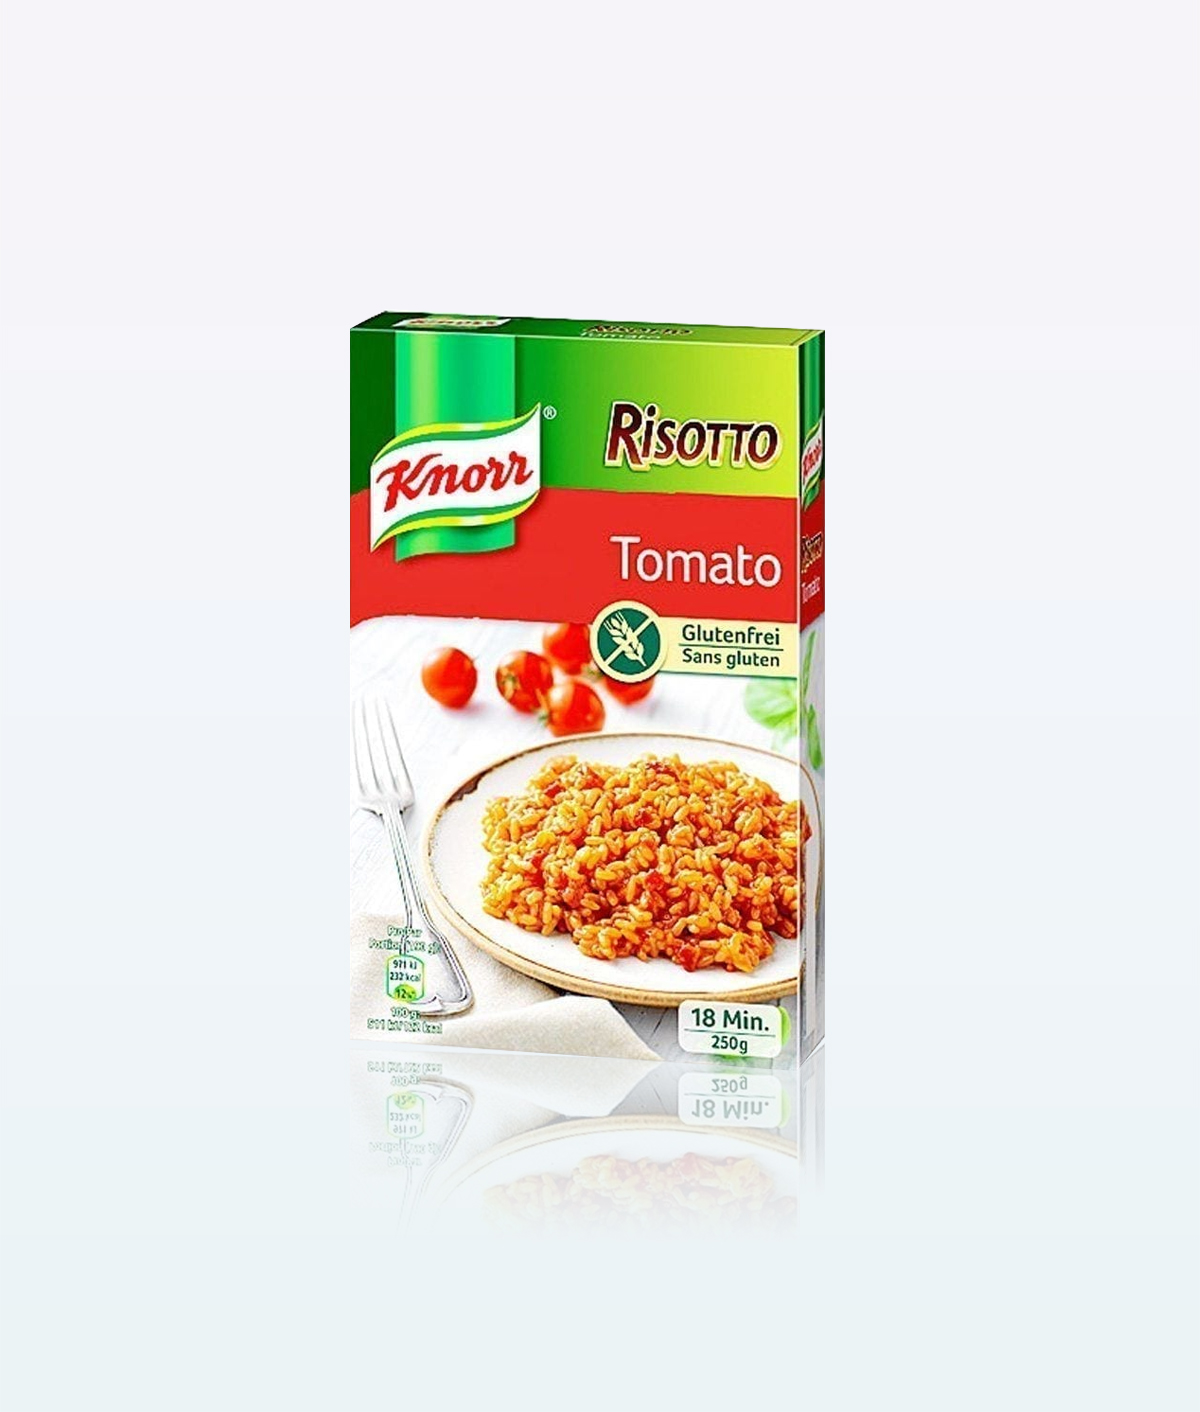 Knorr-risotto tomate